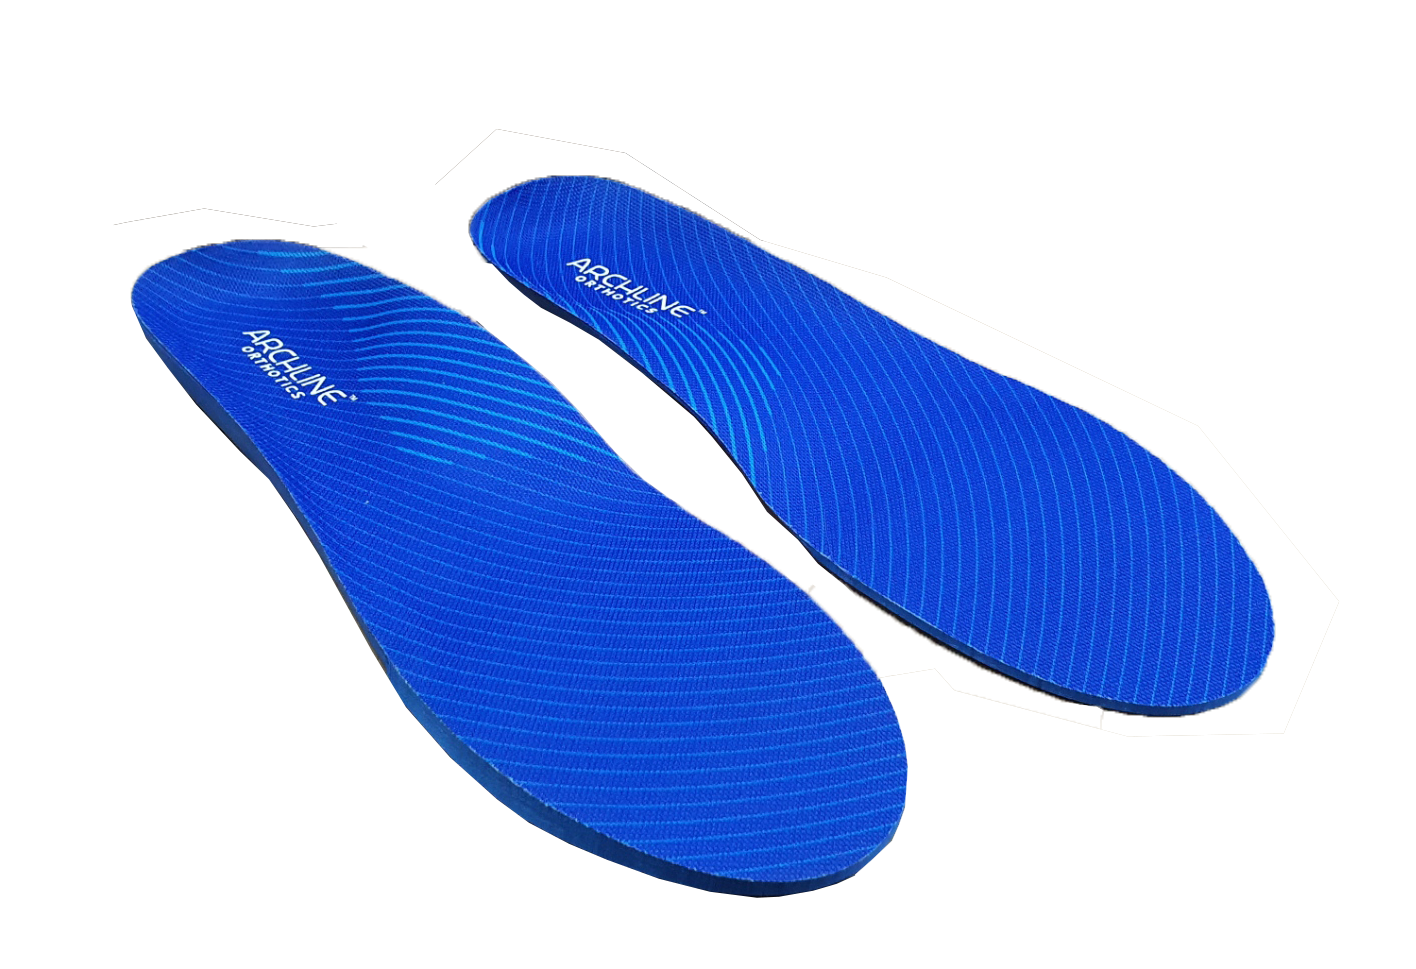 Supination Orthotic Insoles - Full Length (Unisex) Plantar Fasciitis High Arch - Euro 41